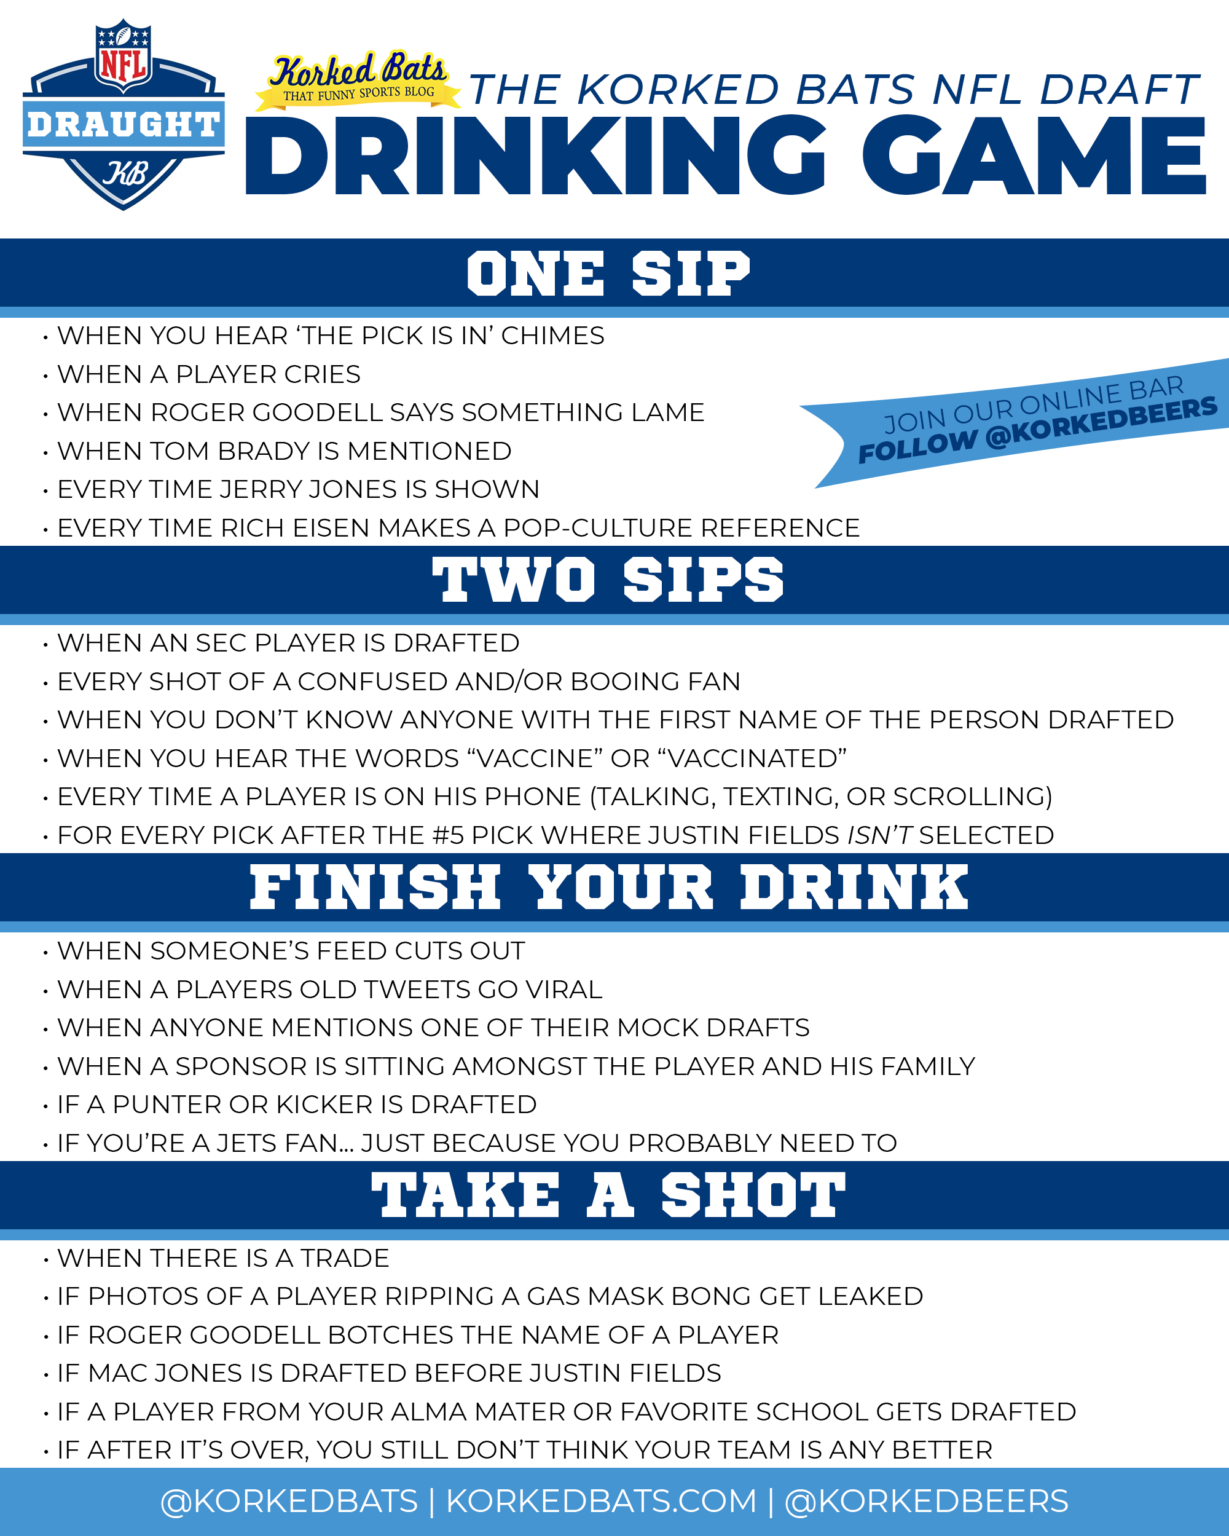 The Official NFL Draft Drinking Game 2021